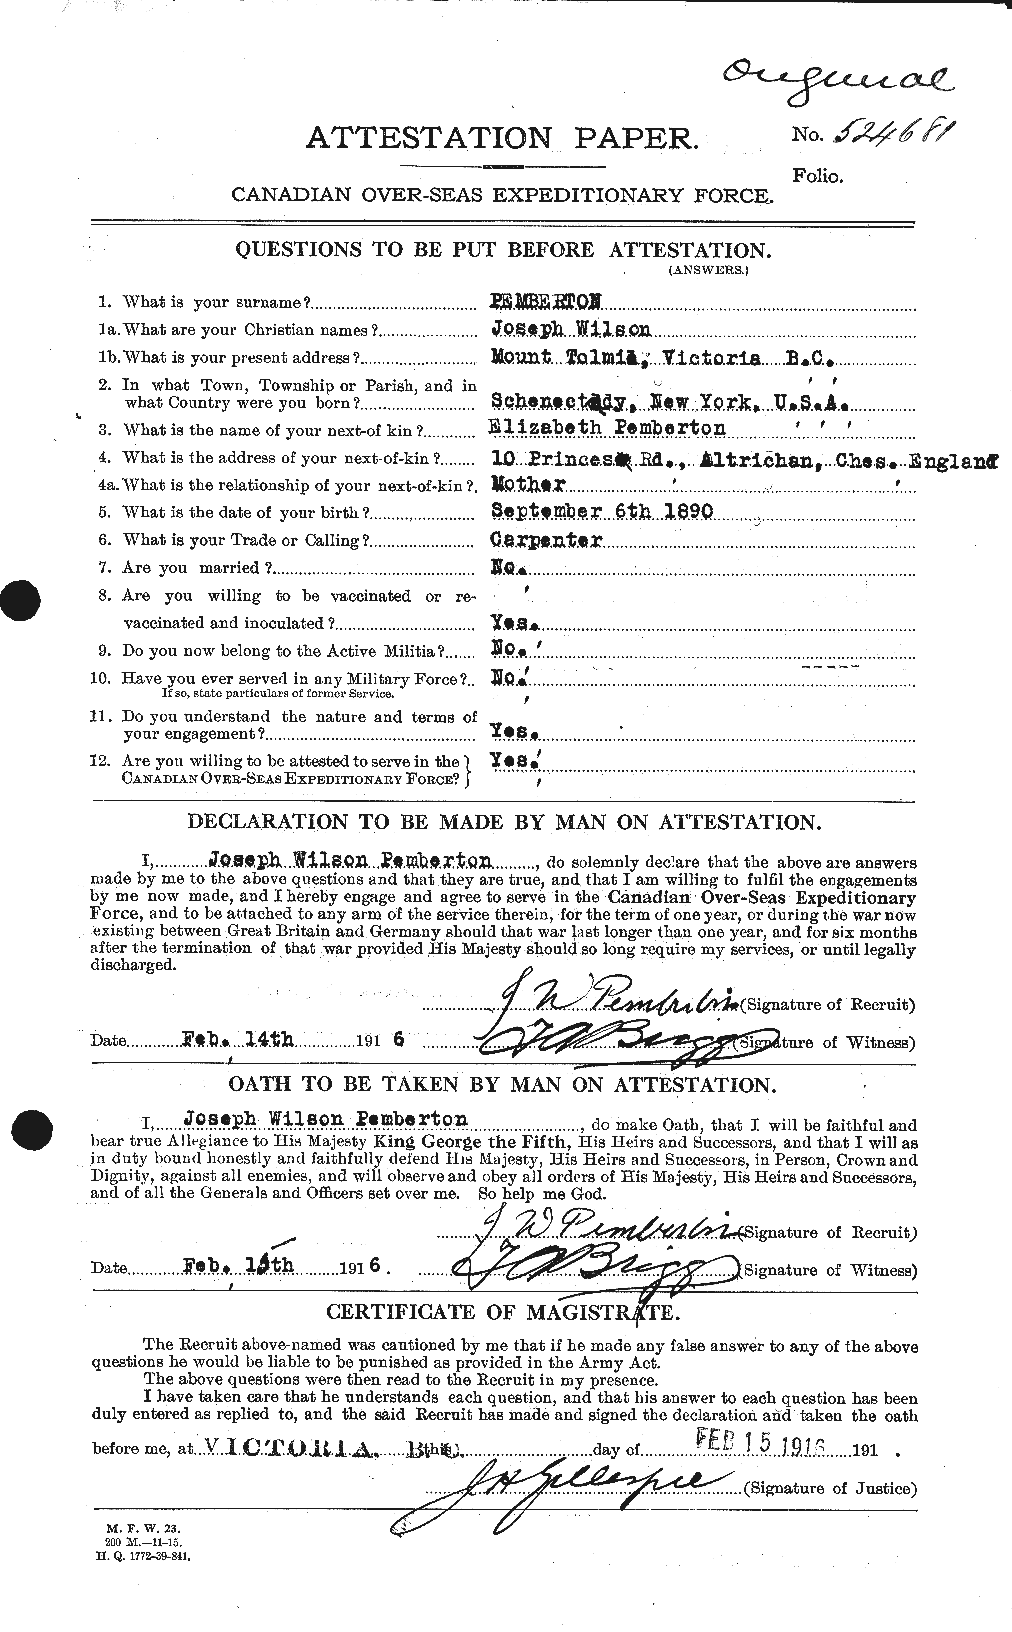 Personnel Records of the First World War - CEF 572784a